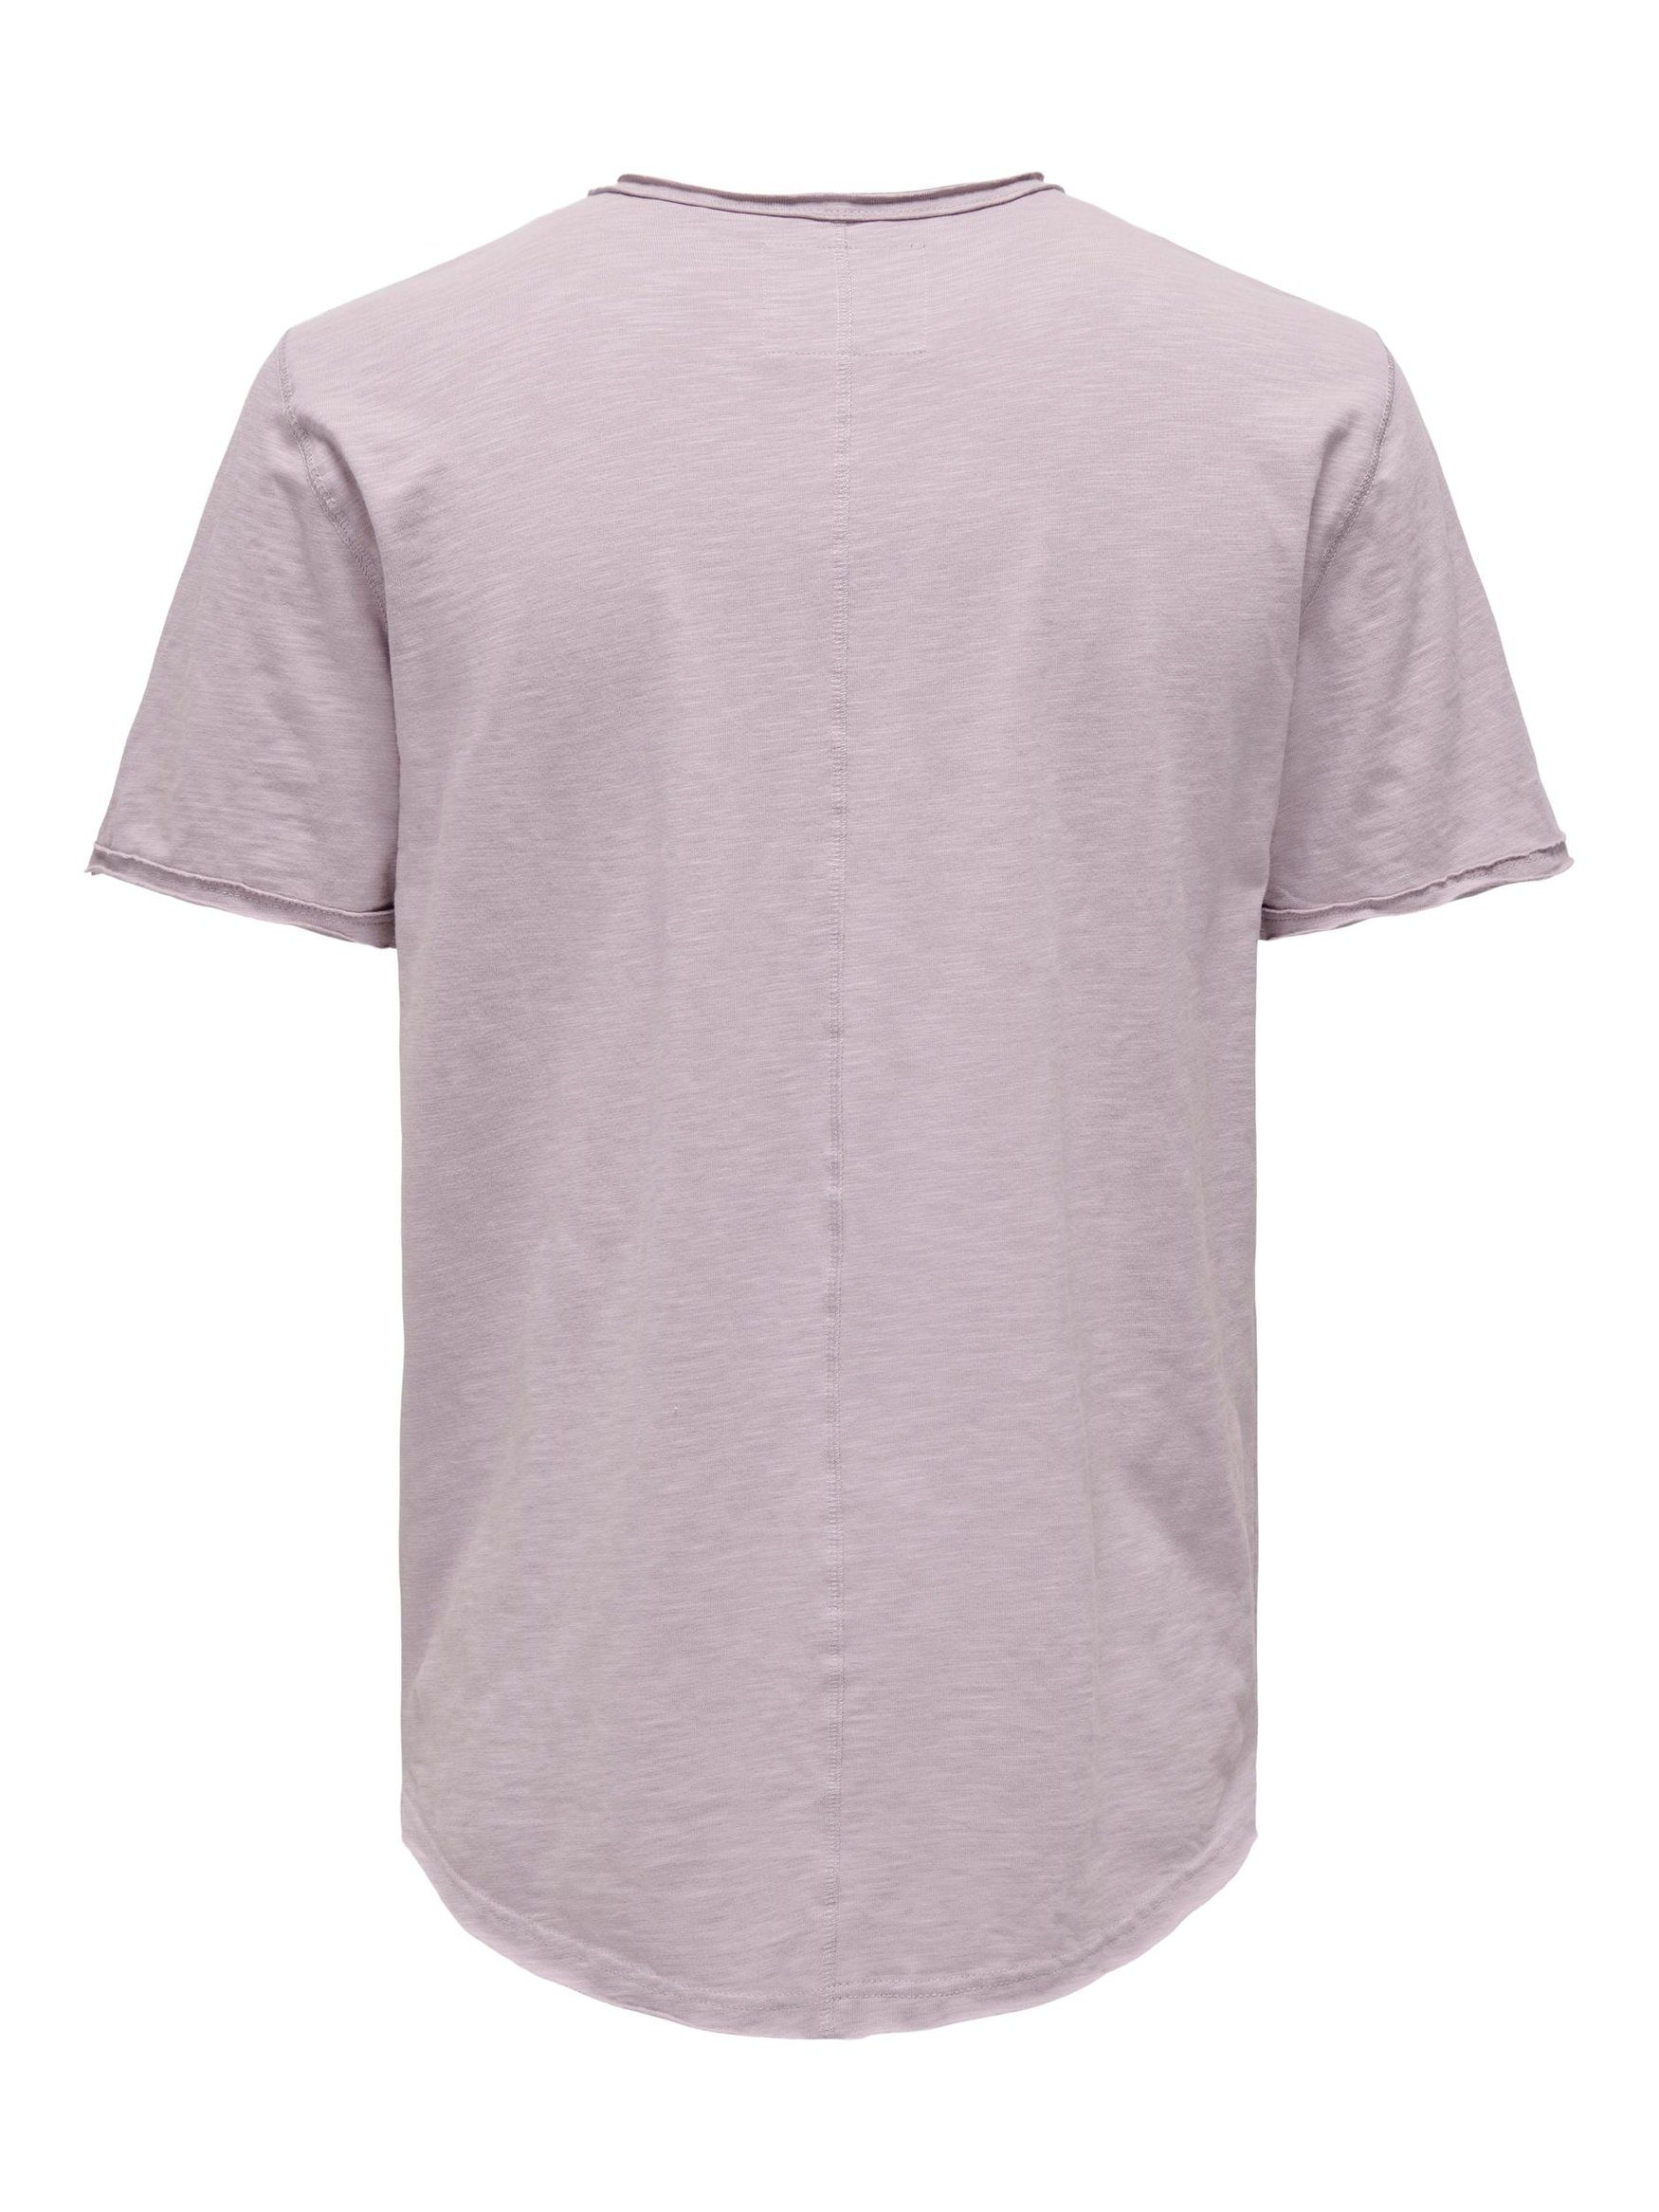 in Kurzarm Langes & T-Shirt T-Shirt ONSBENNE Rundhals 4783 SONS Basic Shirt Rosa Einfarbiges ONLY